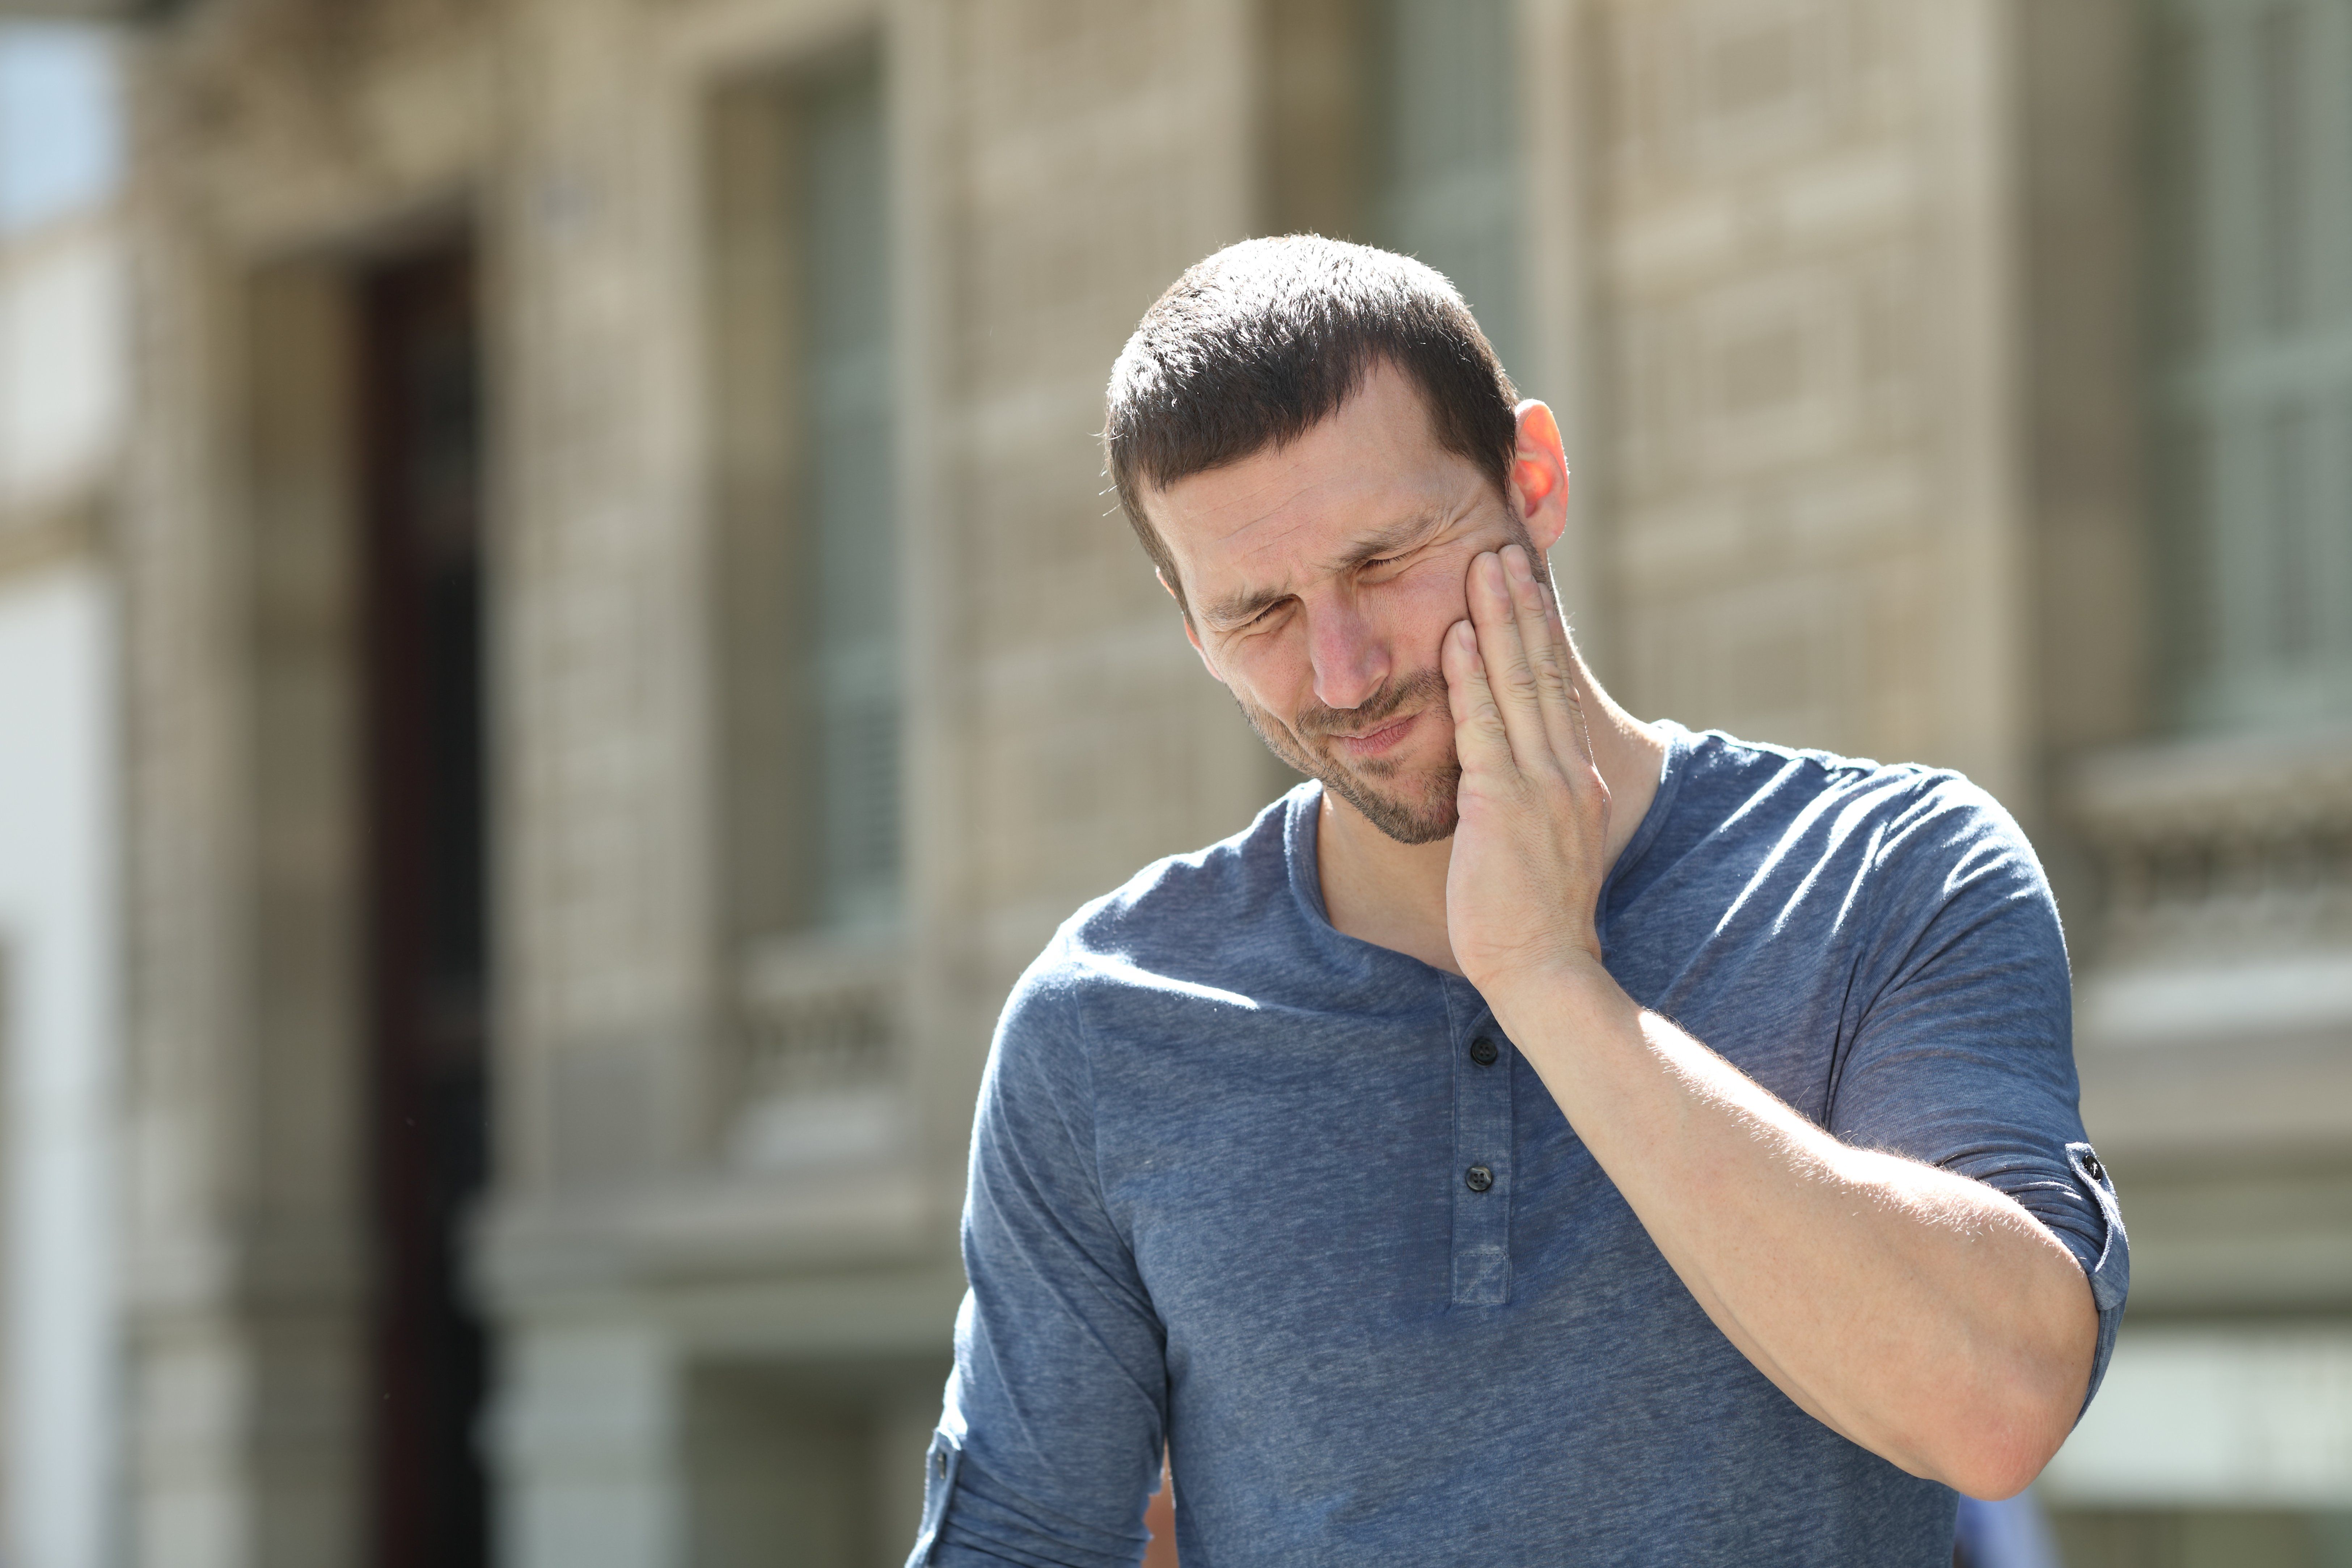 5 Reasons to See Your Dentist for TMJ Pain